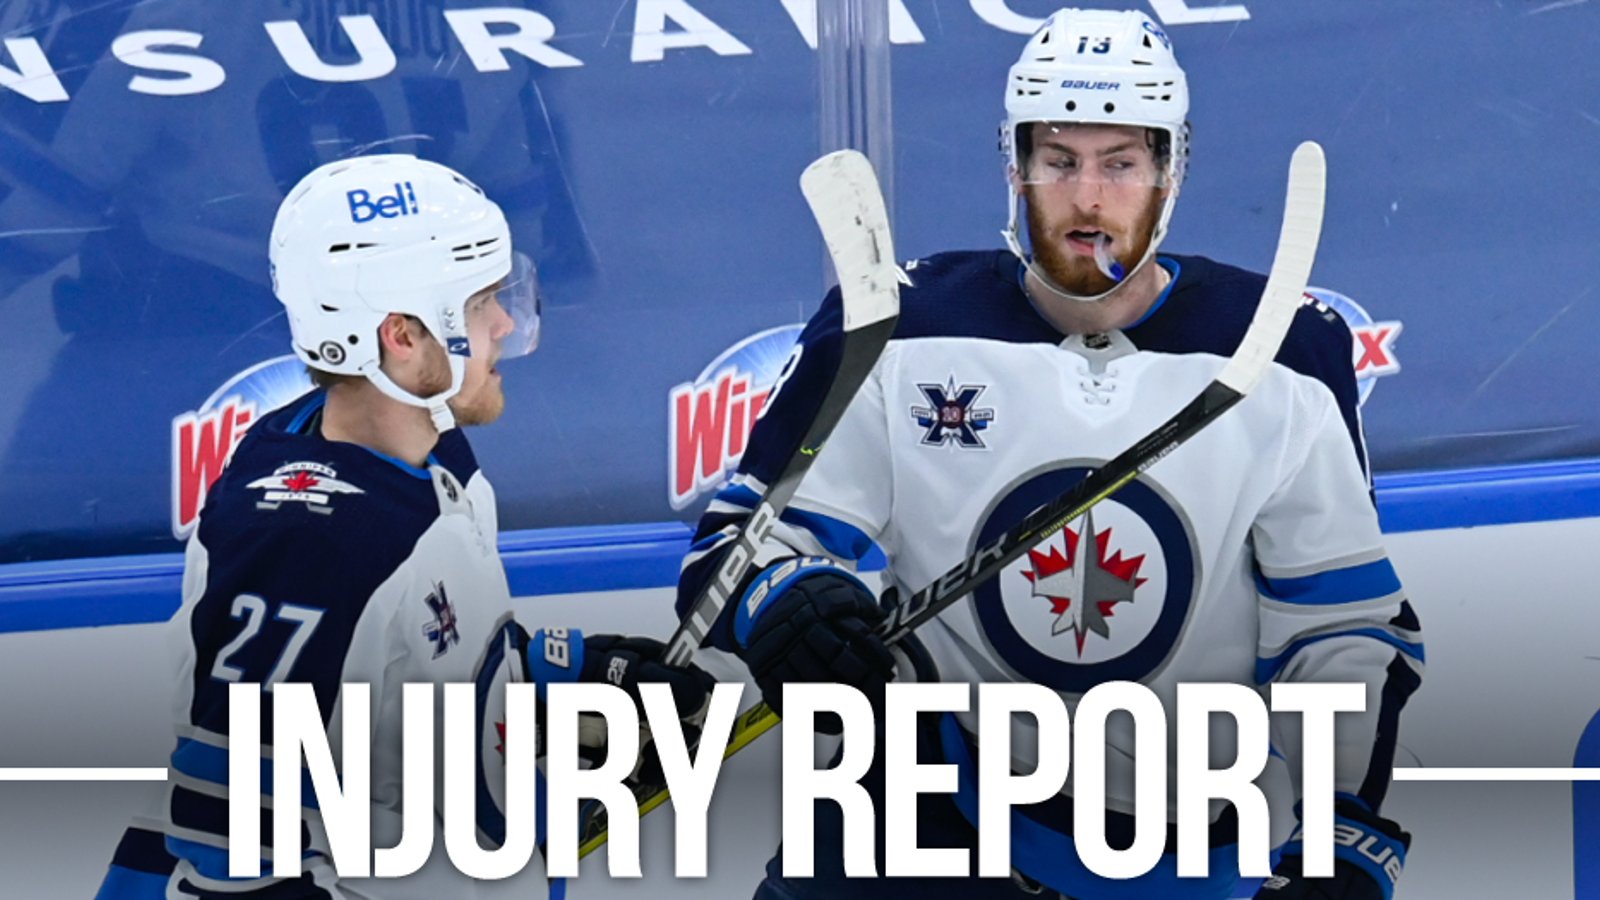 Jets coach Paul Maurice provides a juicy update on Ehlers' and Dubois' status for Game 1